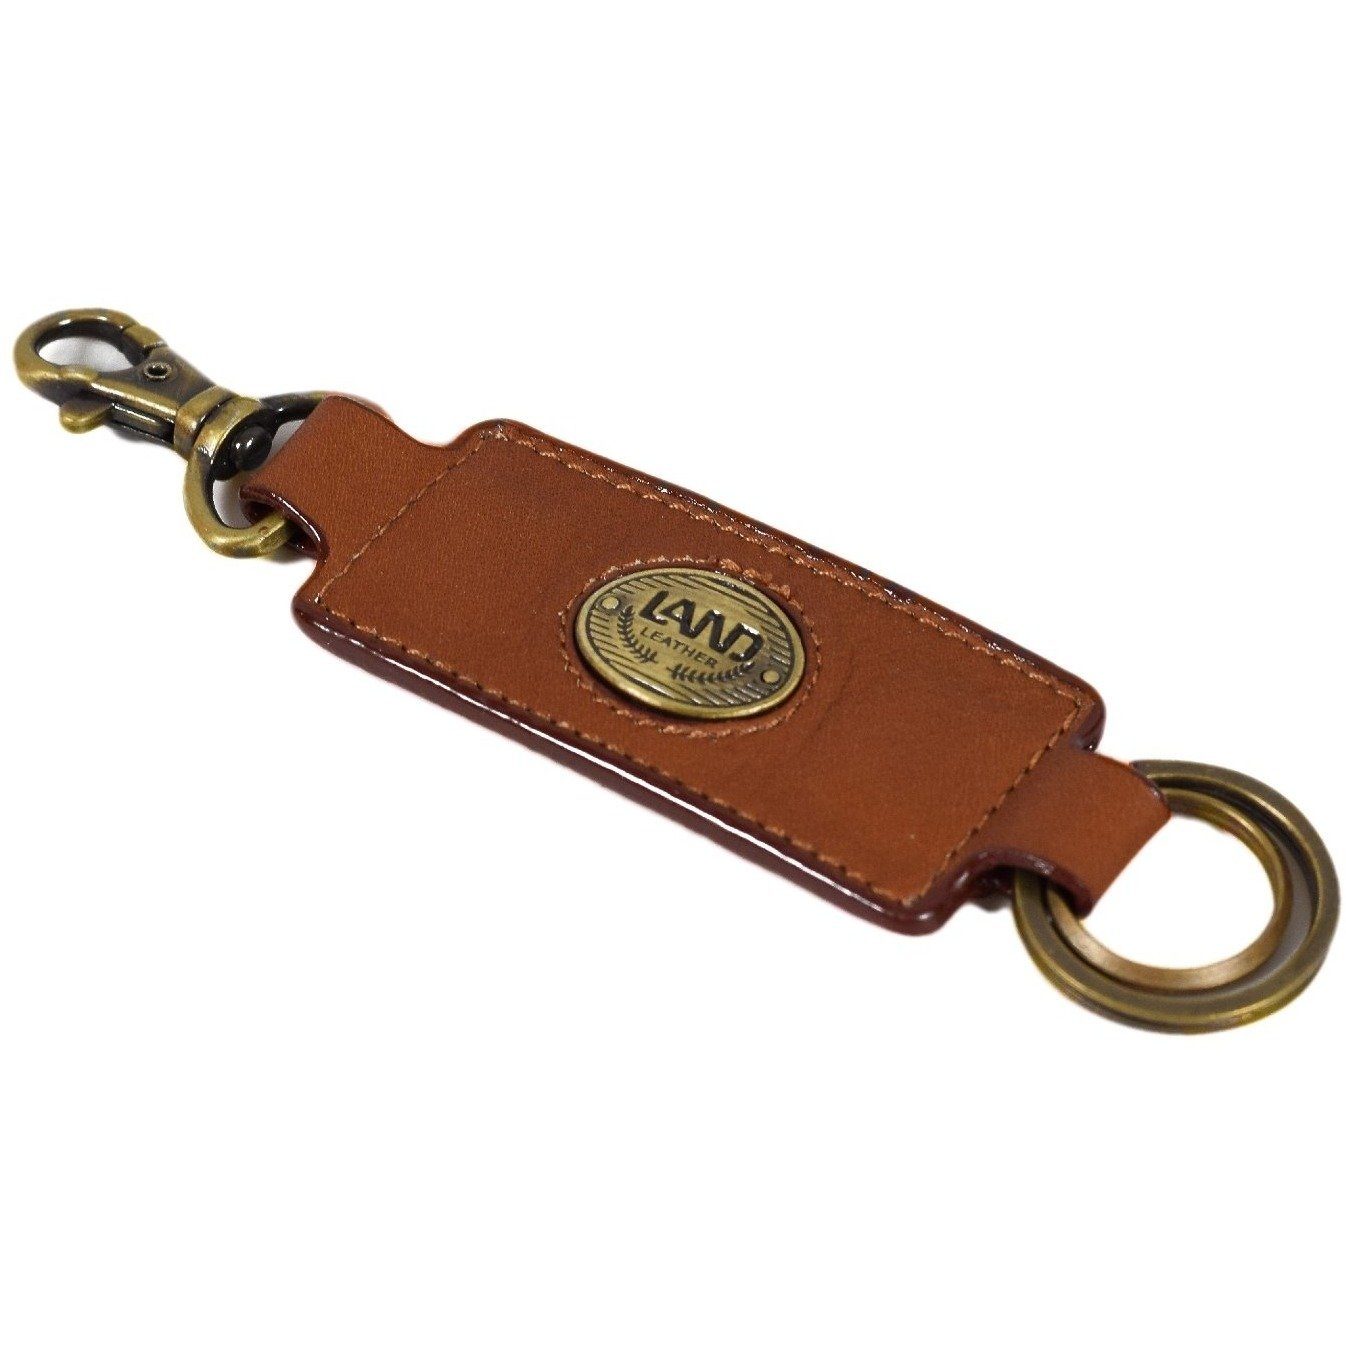 Clip On Key Ring – LAND Leather Goods